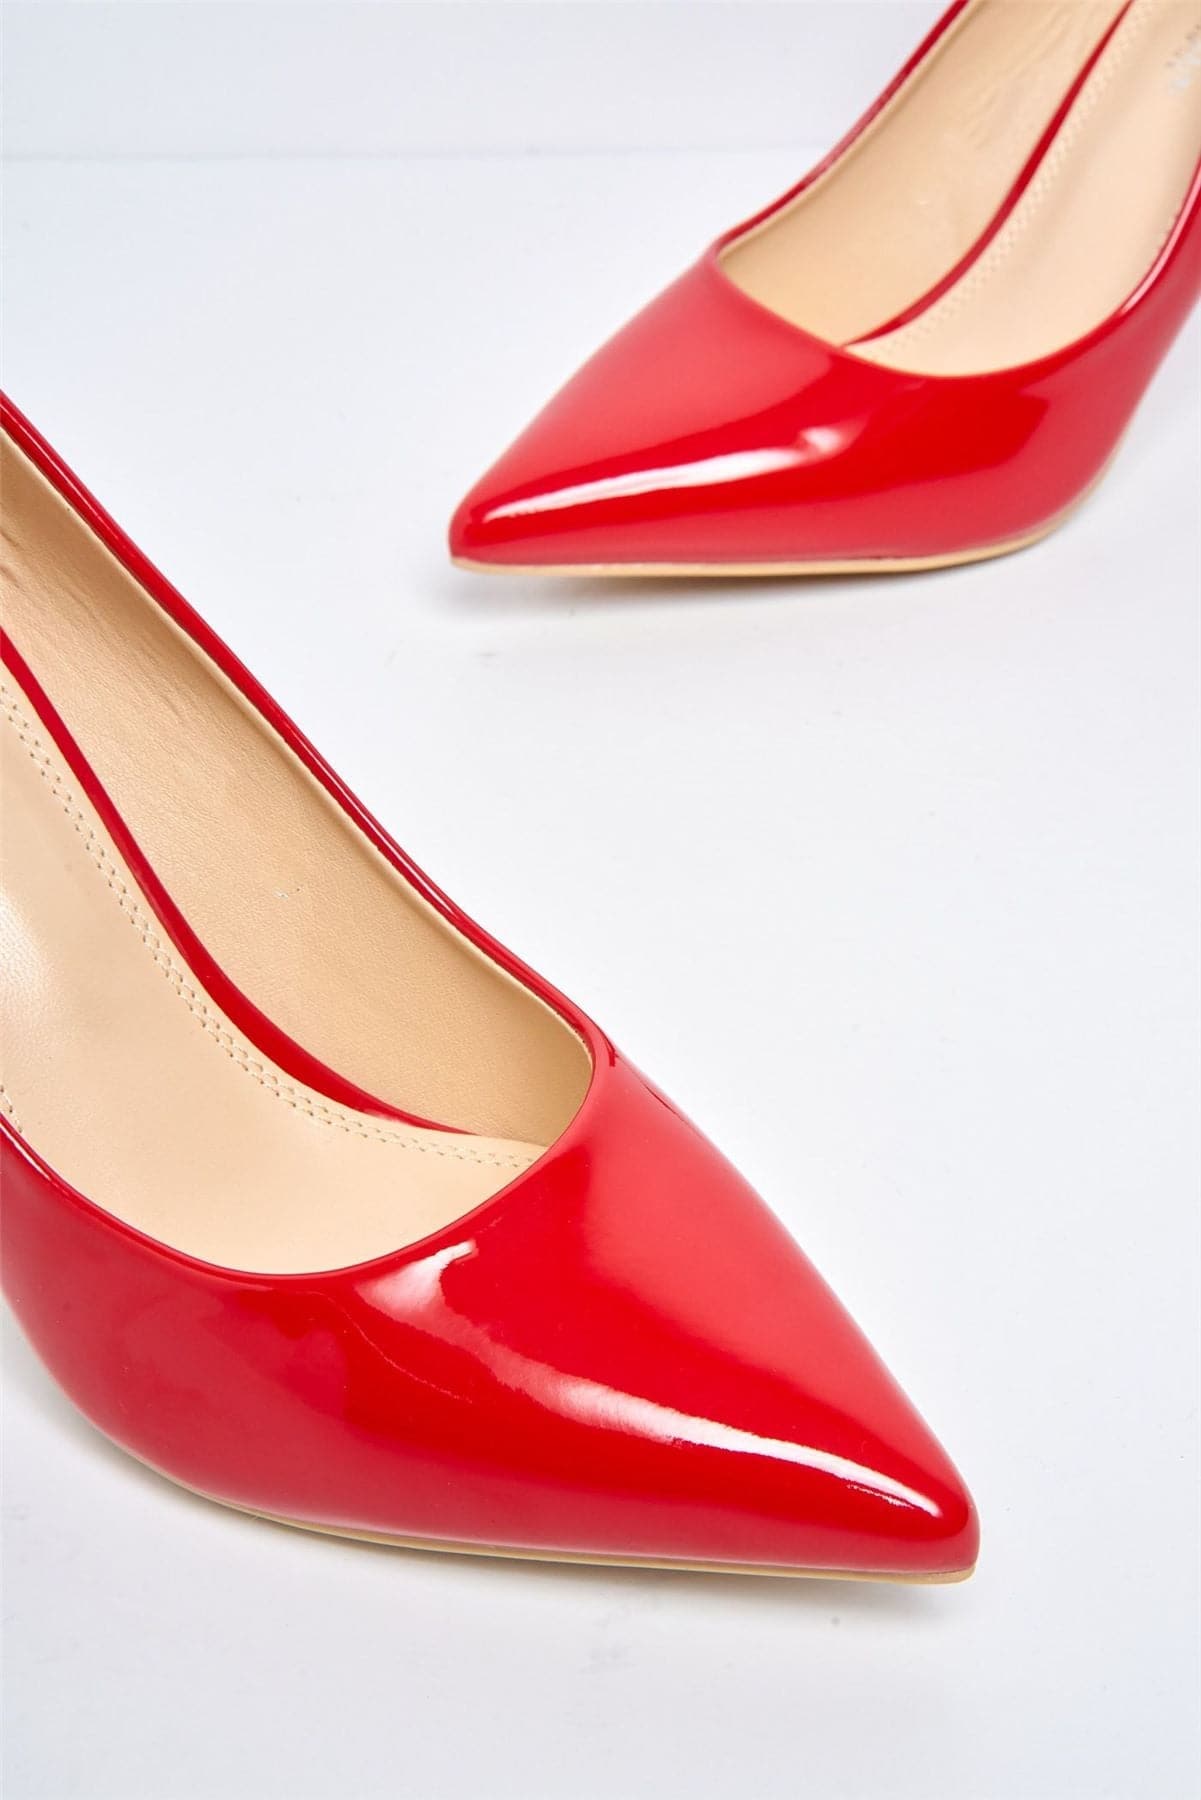 Miss Diva Ingrid Pointed Toe Court Heels in Red Patent